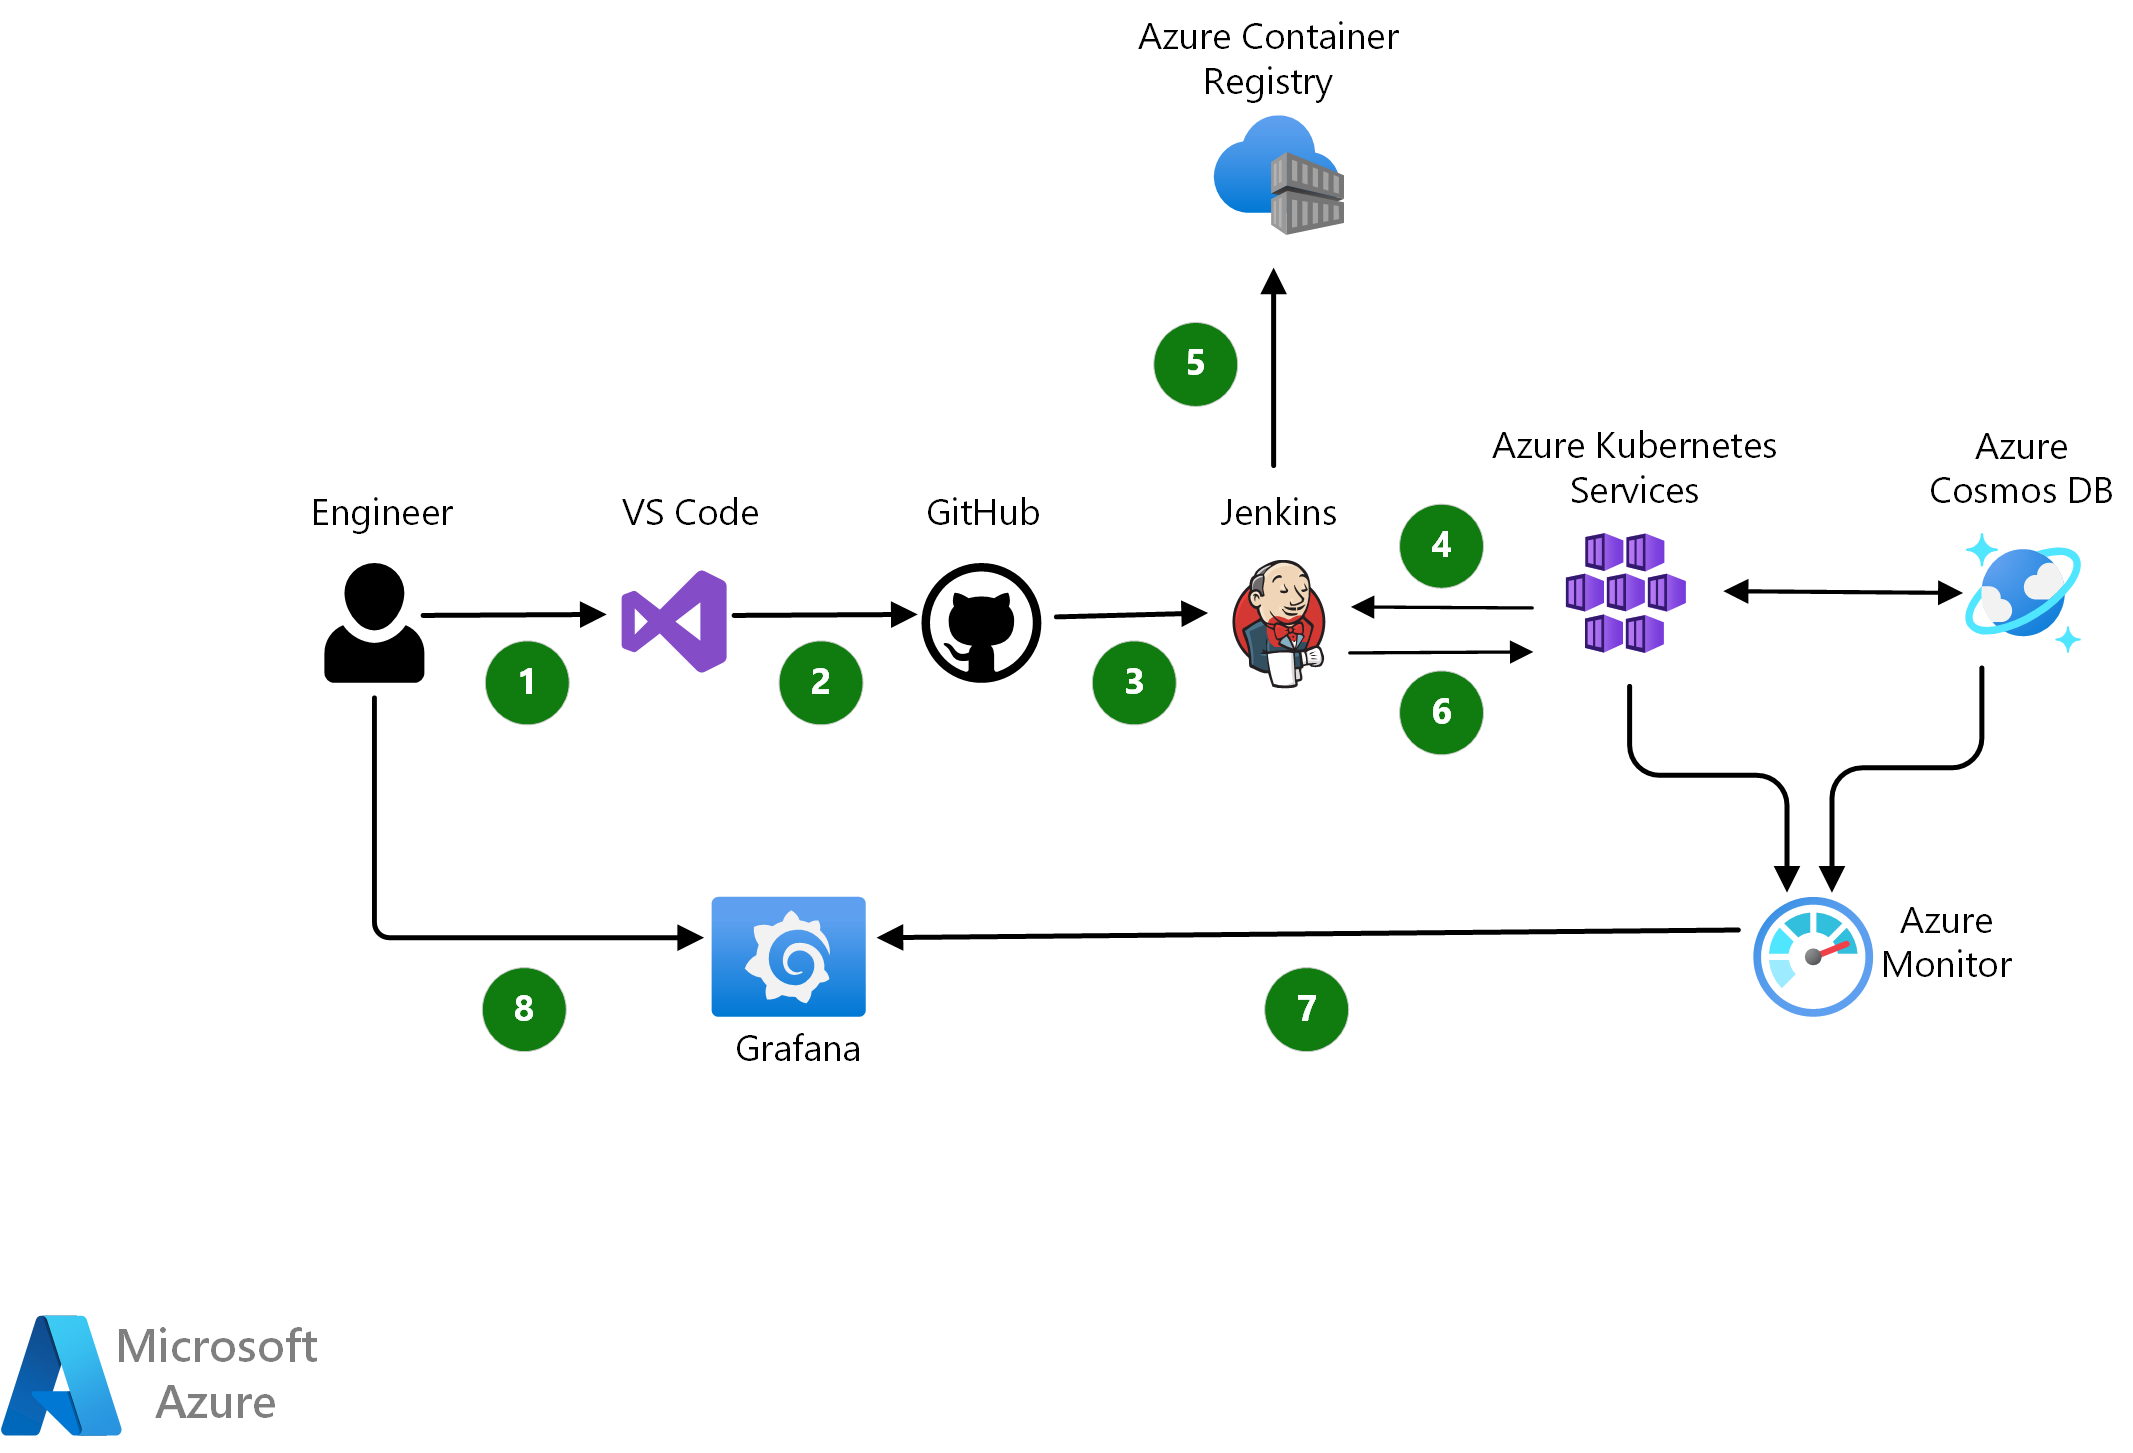 Architecture overview of the Azure components involved in a DevOps scenario using Jenkins, Azure Container Registry, and Azure Kubernetes Service